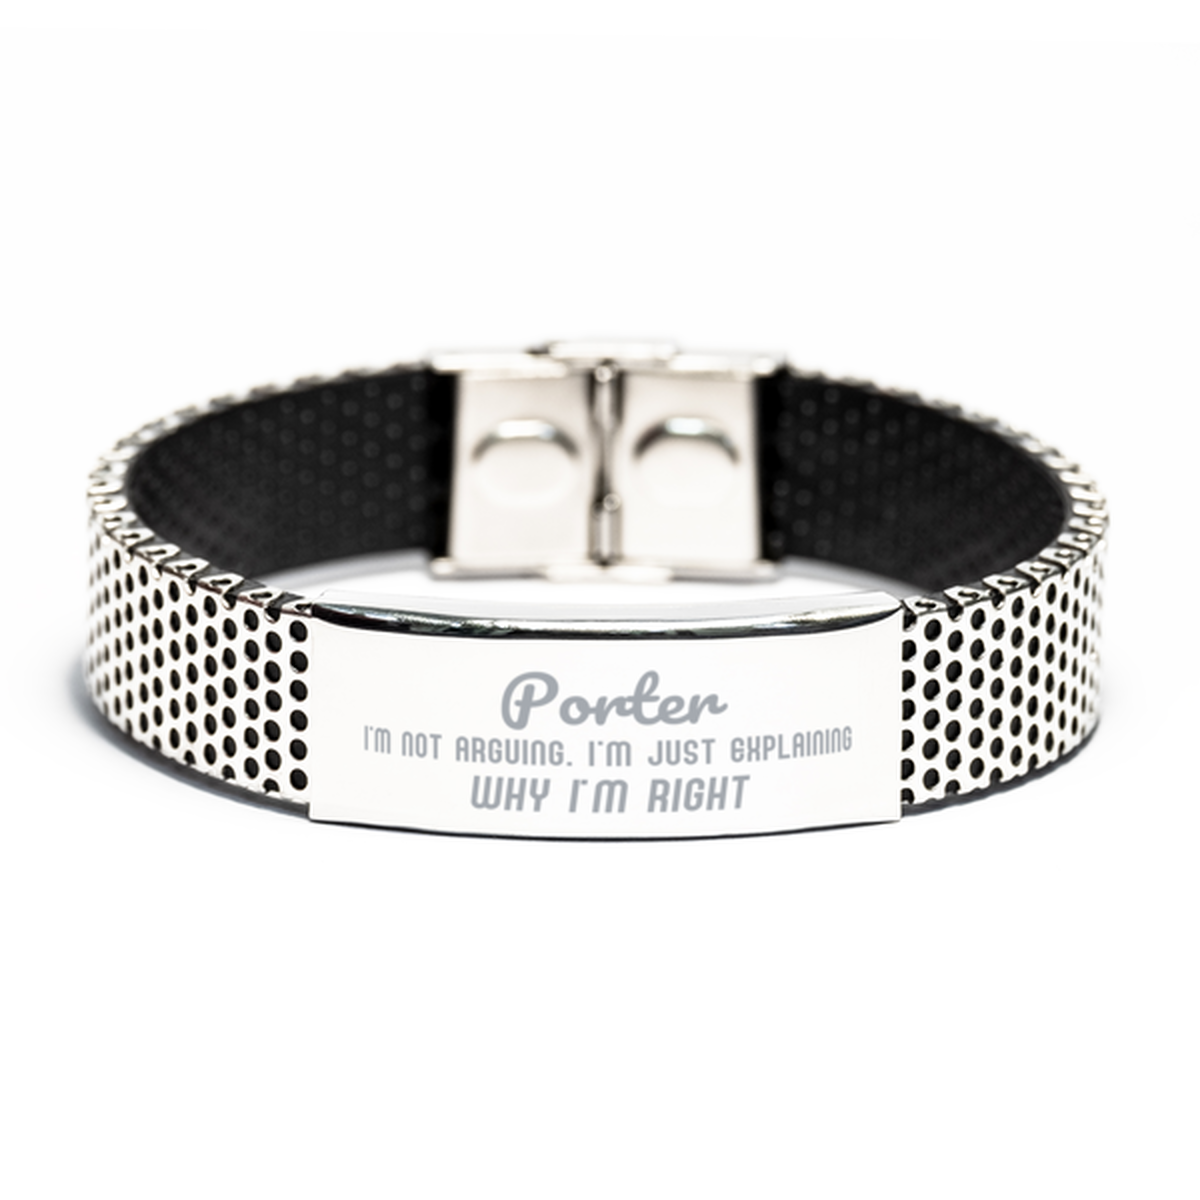 Porter I'm not Arguing. I'm Just Explaining Why I'm RIGHT Stainless Steel Bracelet, Funny Saying Quote Porter Gifts For Porter Graduation Birthday Christmas Gifts for Men Women Coworker